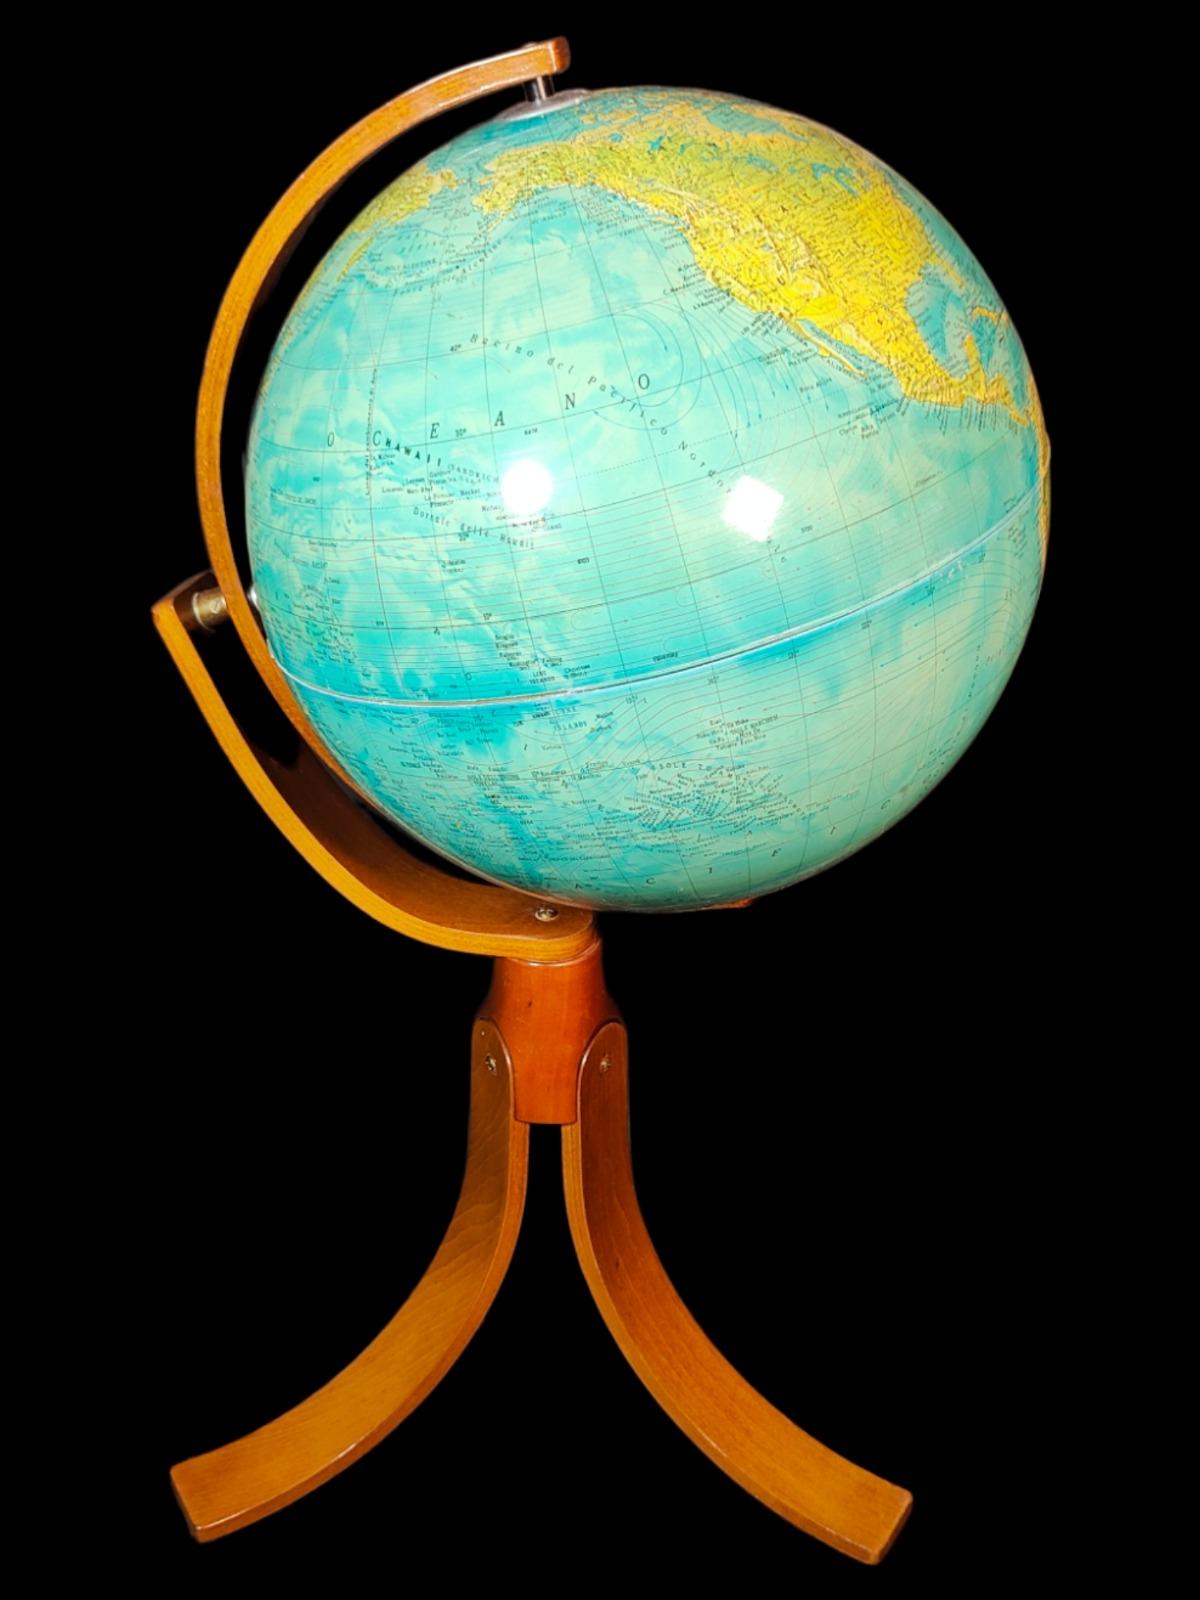 Large Globe 50S
THE GLOBE IS IN PLASTIC AND THE FOOT IN WOOD. 1950s. IT HAS LIGHT. GOOD CONDITION WITH CENTURIES OF USE. MEASUREMENTS: 110 CM IN HEIGHT AND 60 CM IN DIAMETER
good condition